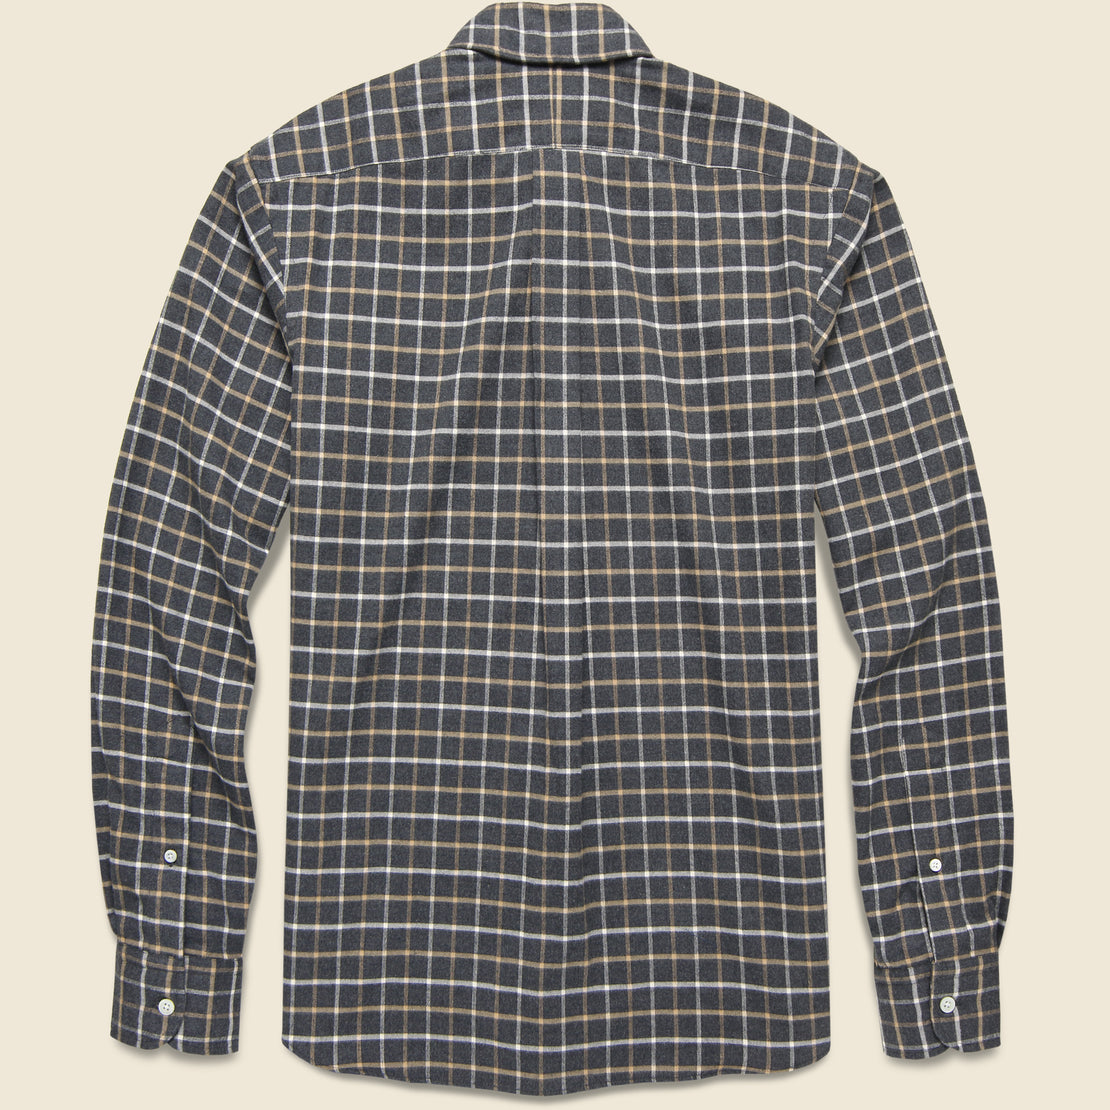 Check Brushed Flannel Shirt - Charcoal/Tan/Cream - Hamilton Shirt Co. - STAG Provisions - Tops - L/S Woven - Plaid